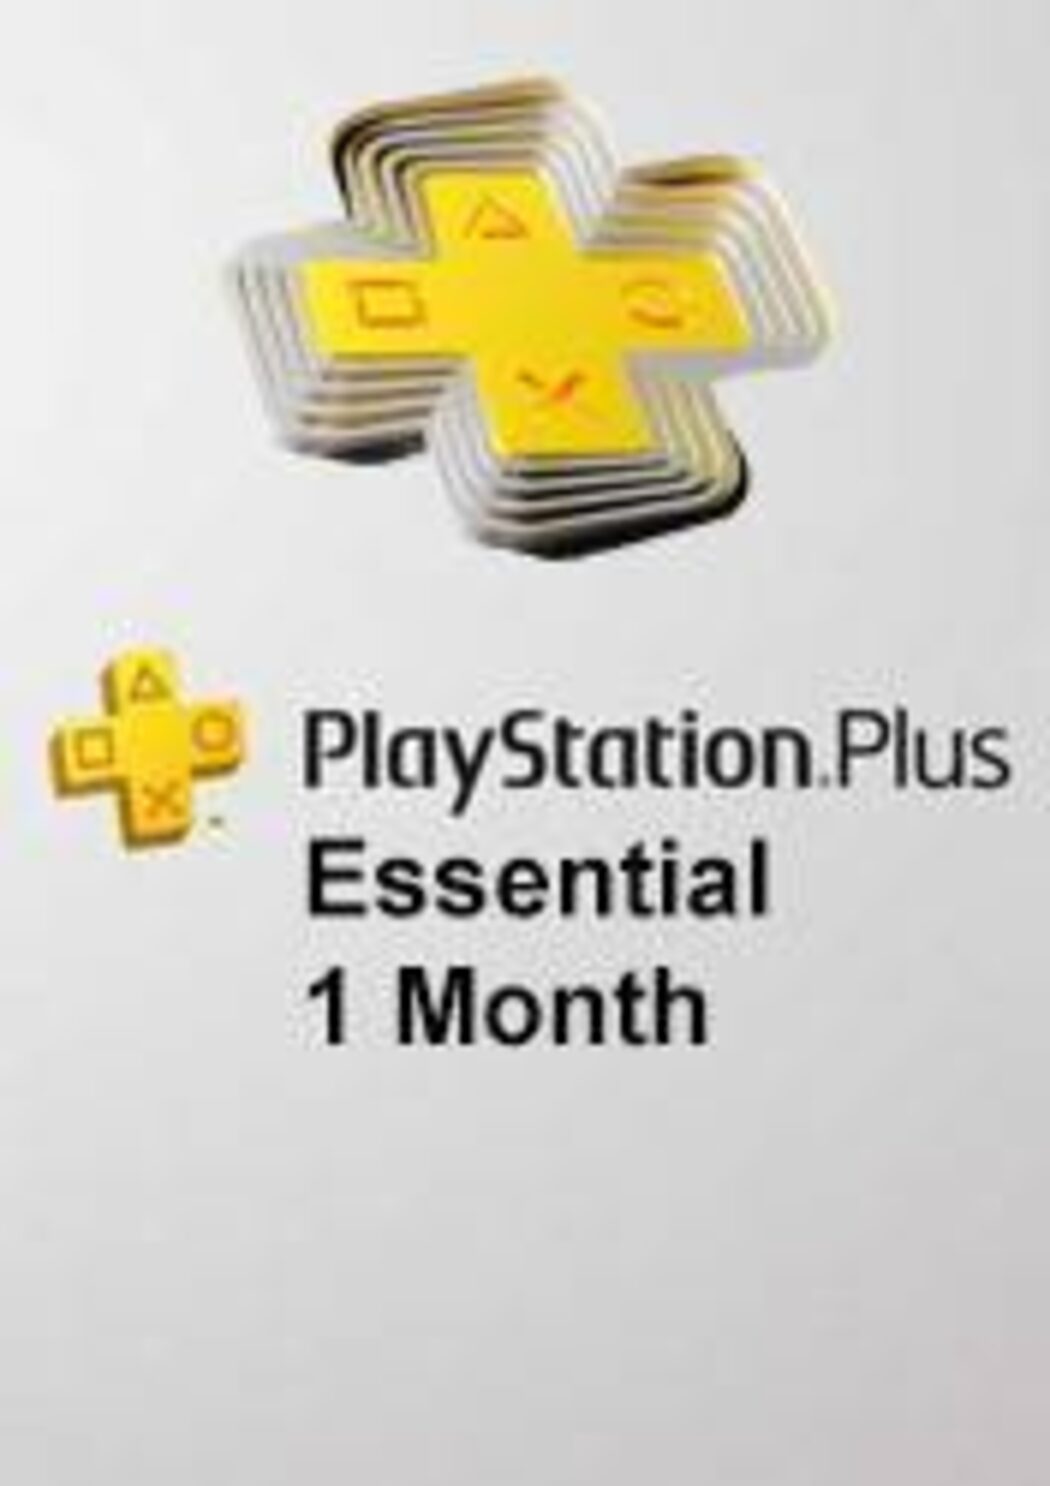 Subscribing to PlayStation®Plus